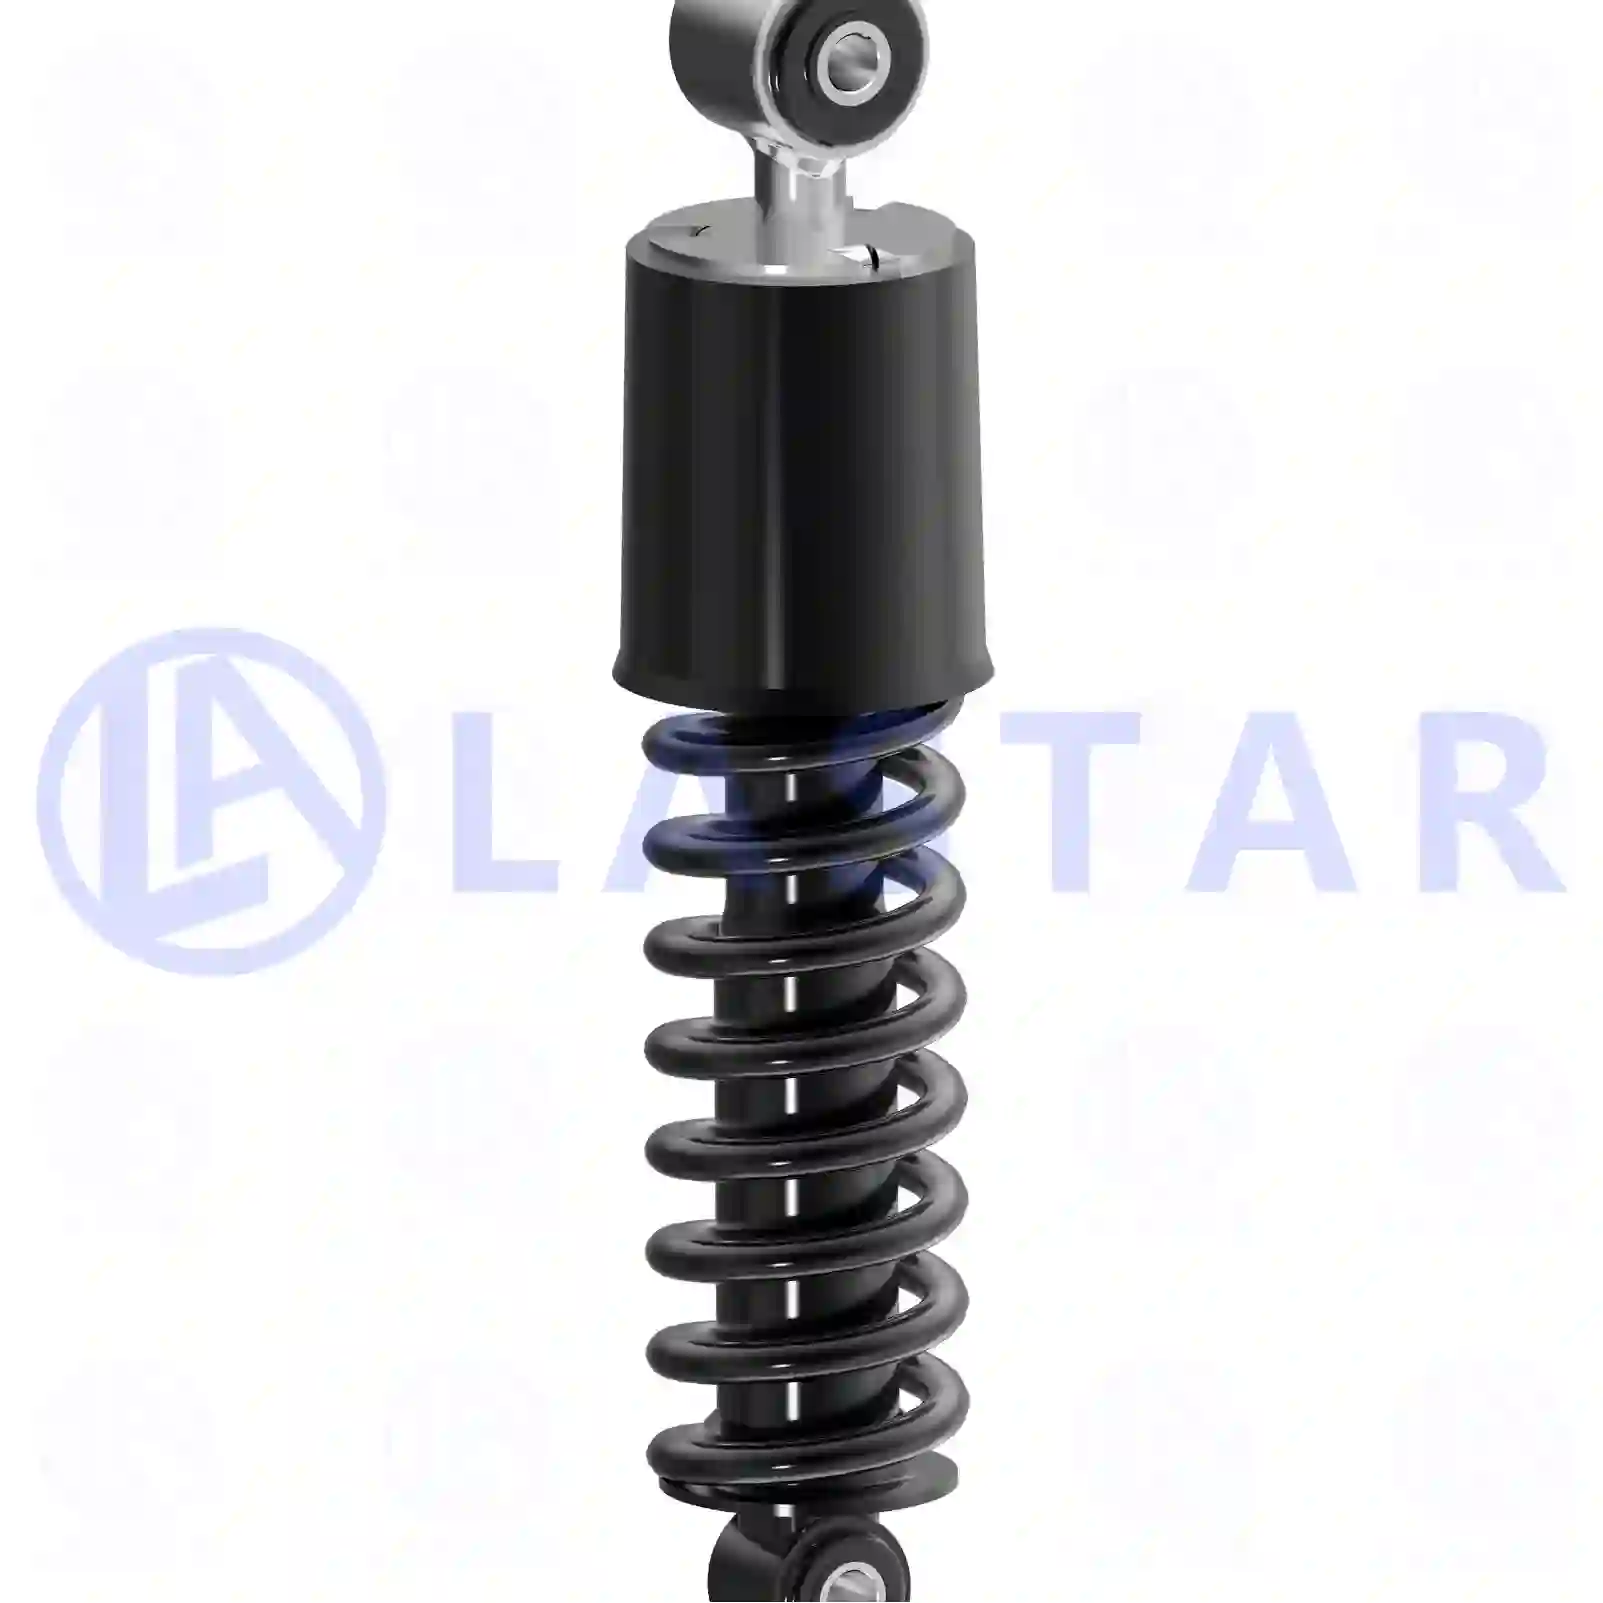 Cabin shock absorber, 77728027, 9408903119 ||  77728027 Lastar Spare Part | Truck Spare Parts, Auotomotive Spare Parts Cabin shock absorber, 77728027, 9408903119 ||  77728027 Lastar Spare Part | Truck Spare Parts, Auotomotive Spare Parts